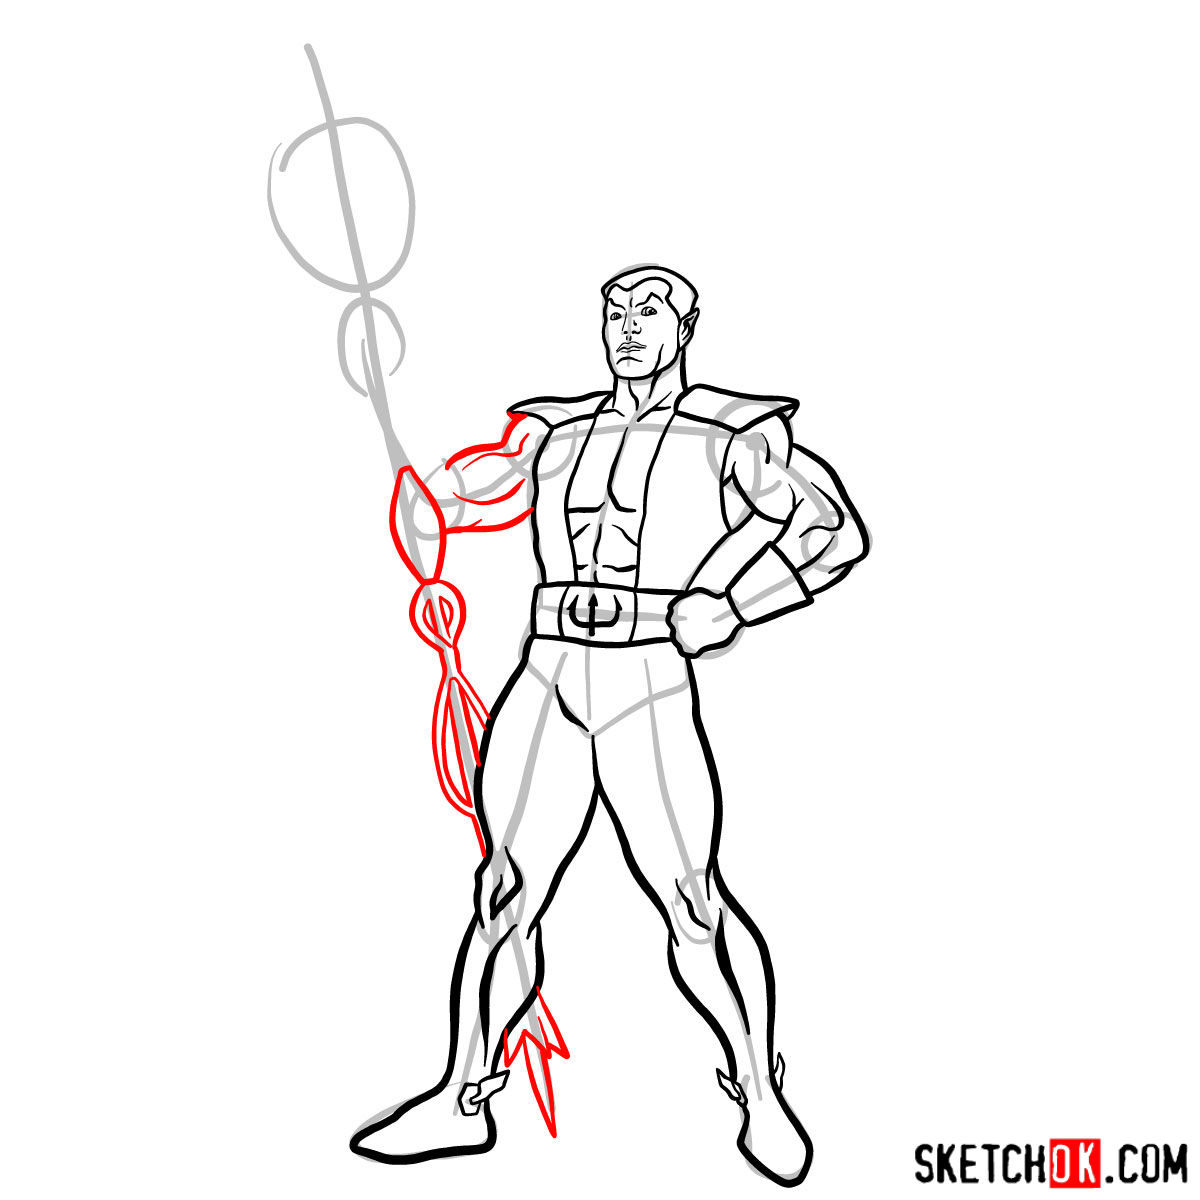 How to draw Namor the Sub-Mariner from Marvel Comics - step 13